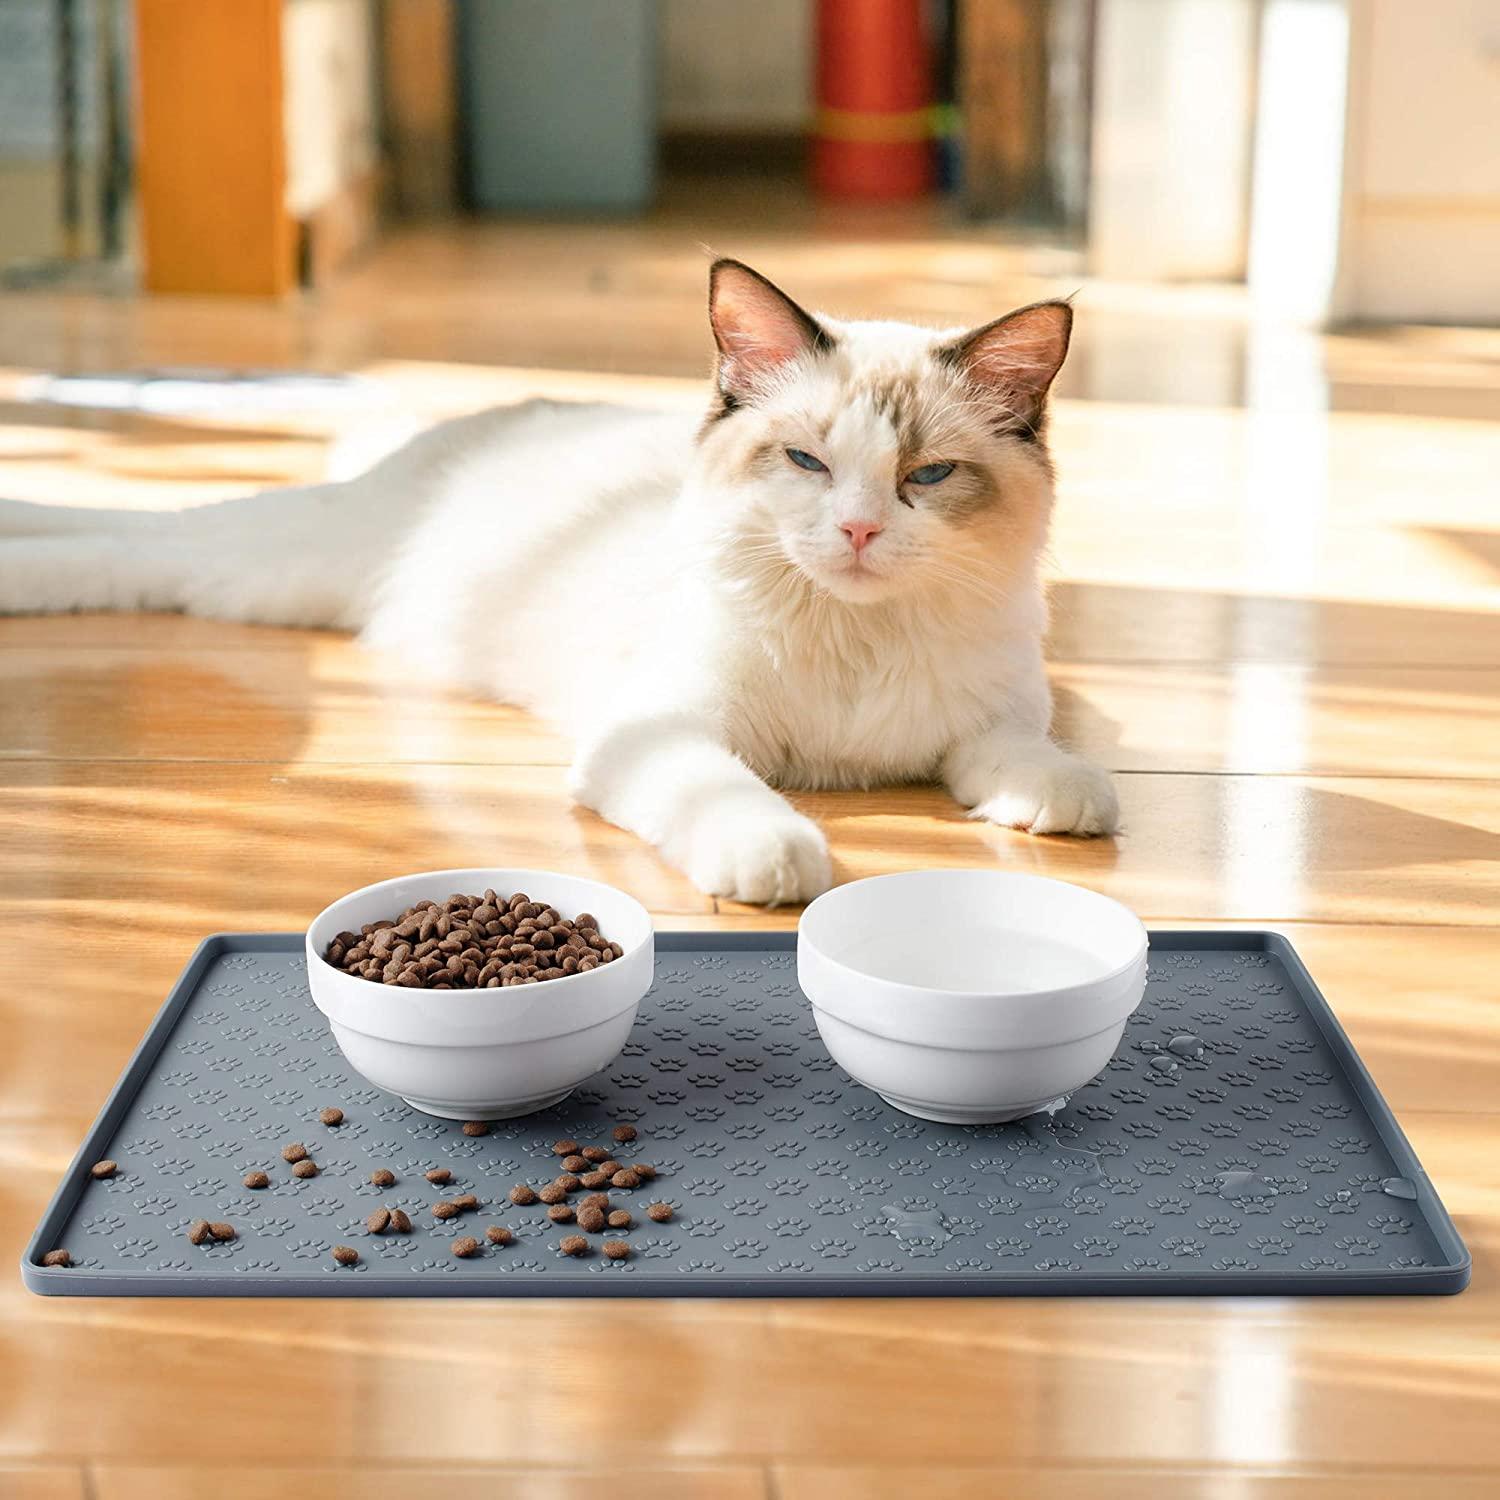 Coomazy Dog Cat Pet Feeding Mat, Silicone Waterproof Food Mat 0.4inch  Raised Edges, Nonslip Pet Placemat Bowl Tray to Stop Food Spills and Water  Messes Out to Floor M: 48x30cm/18.9x11.8in Grey